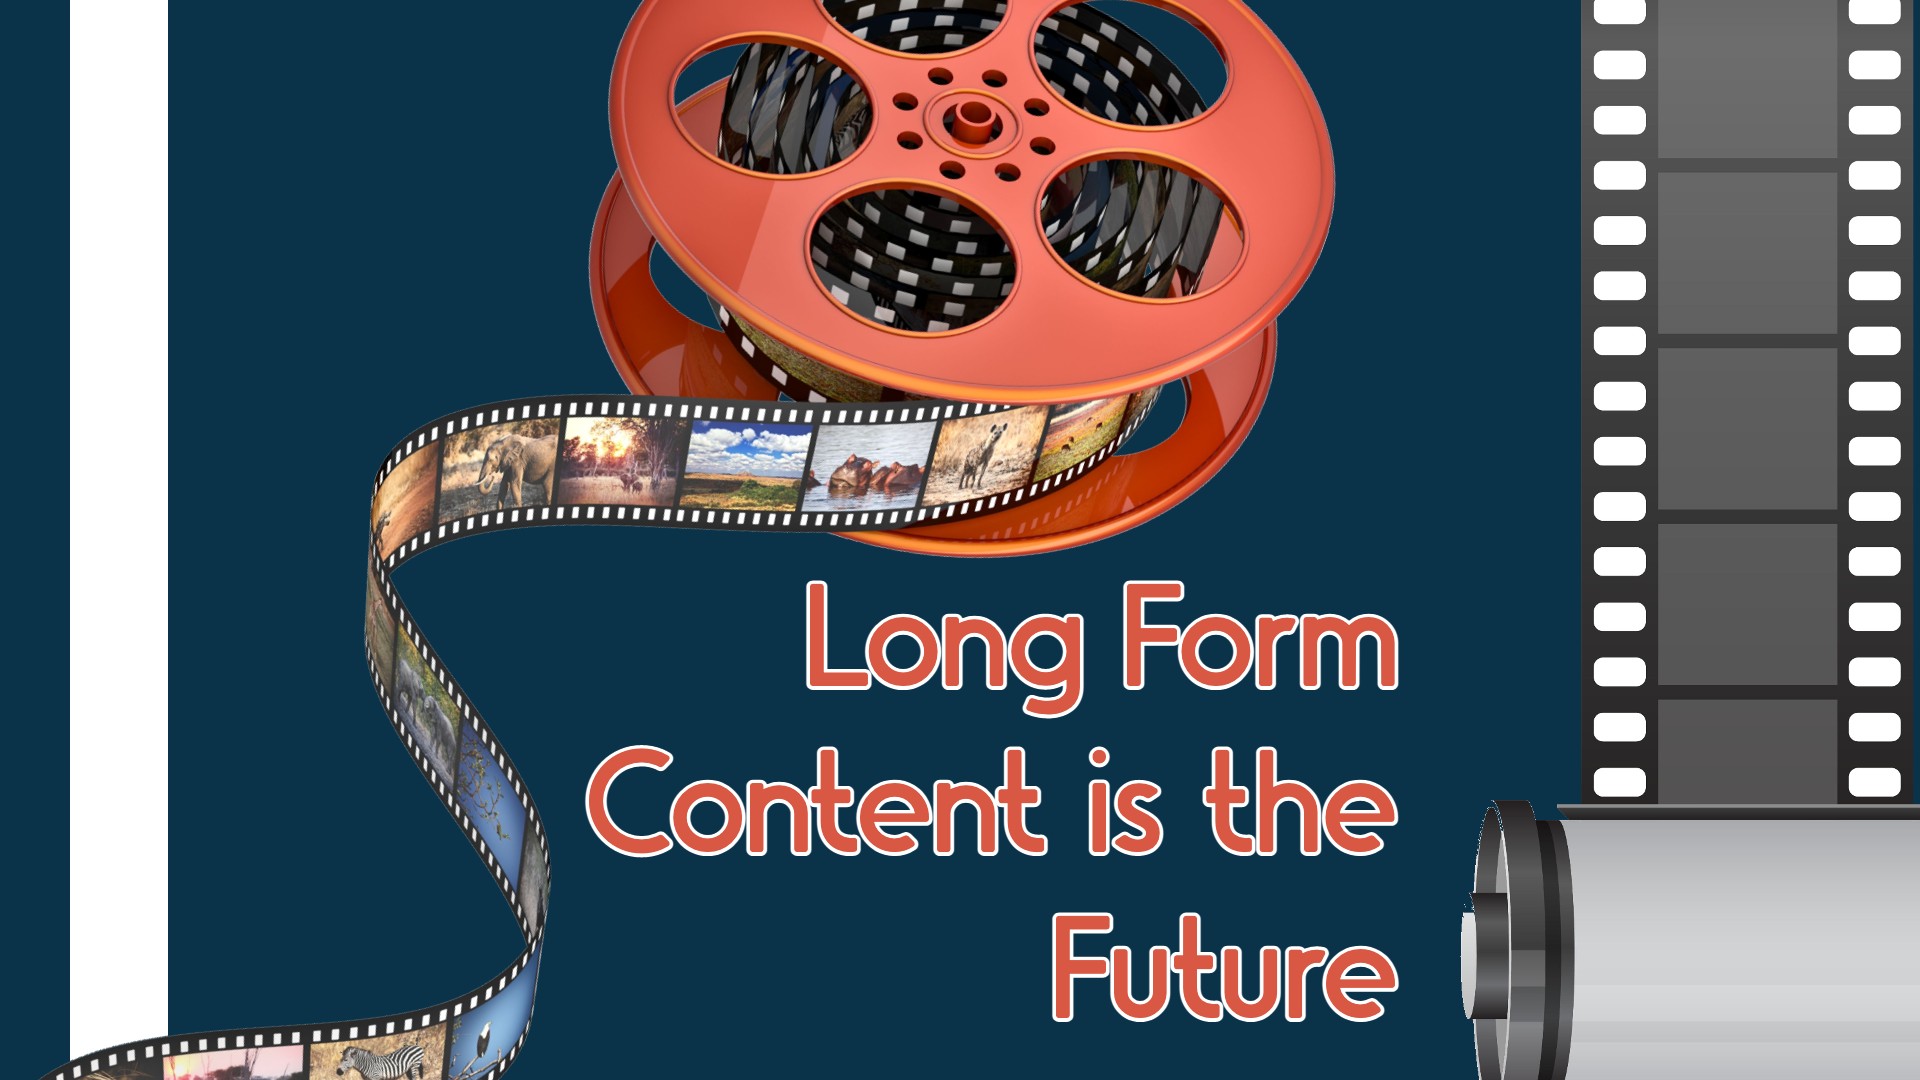 Long-Form Content is the Future